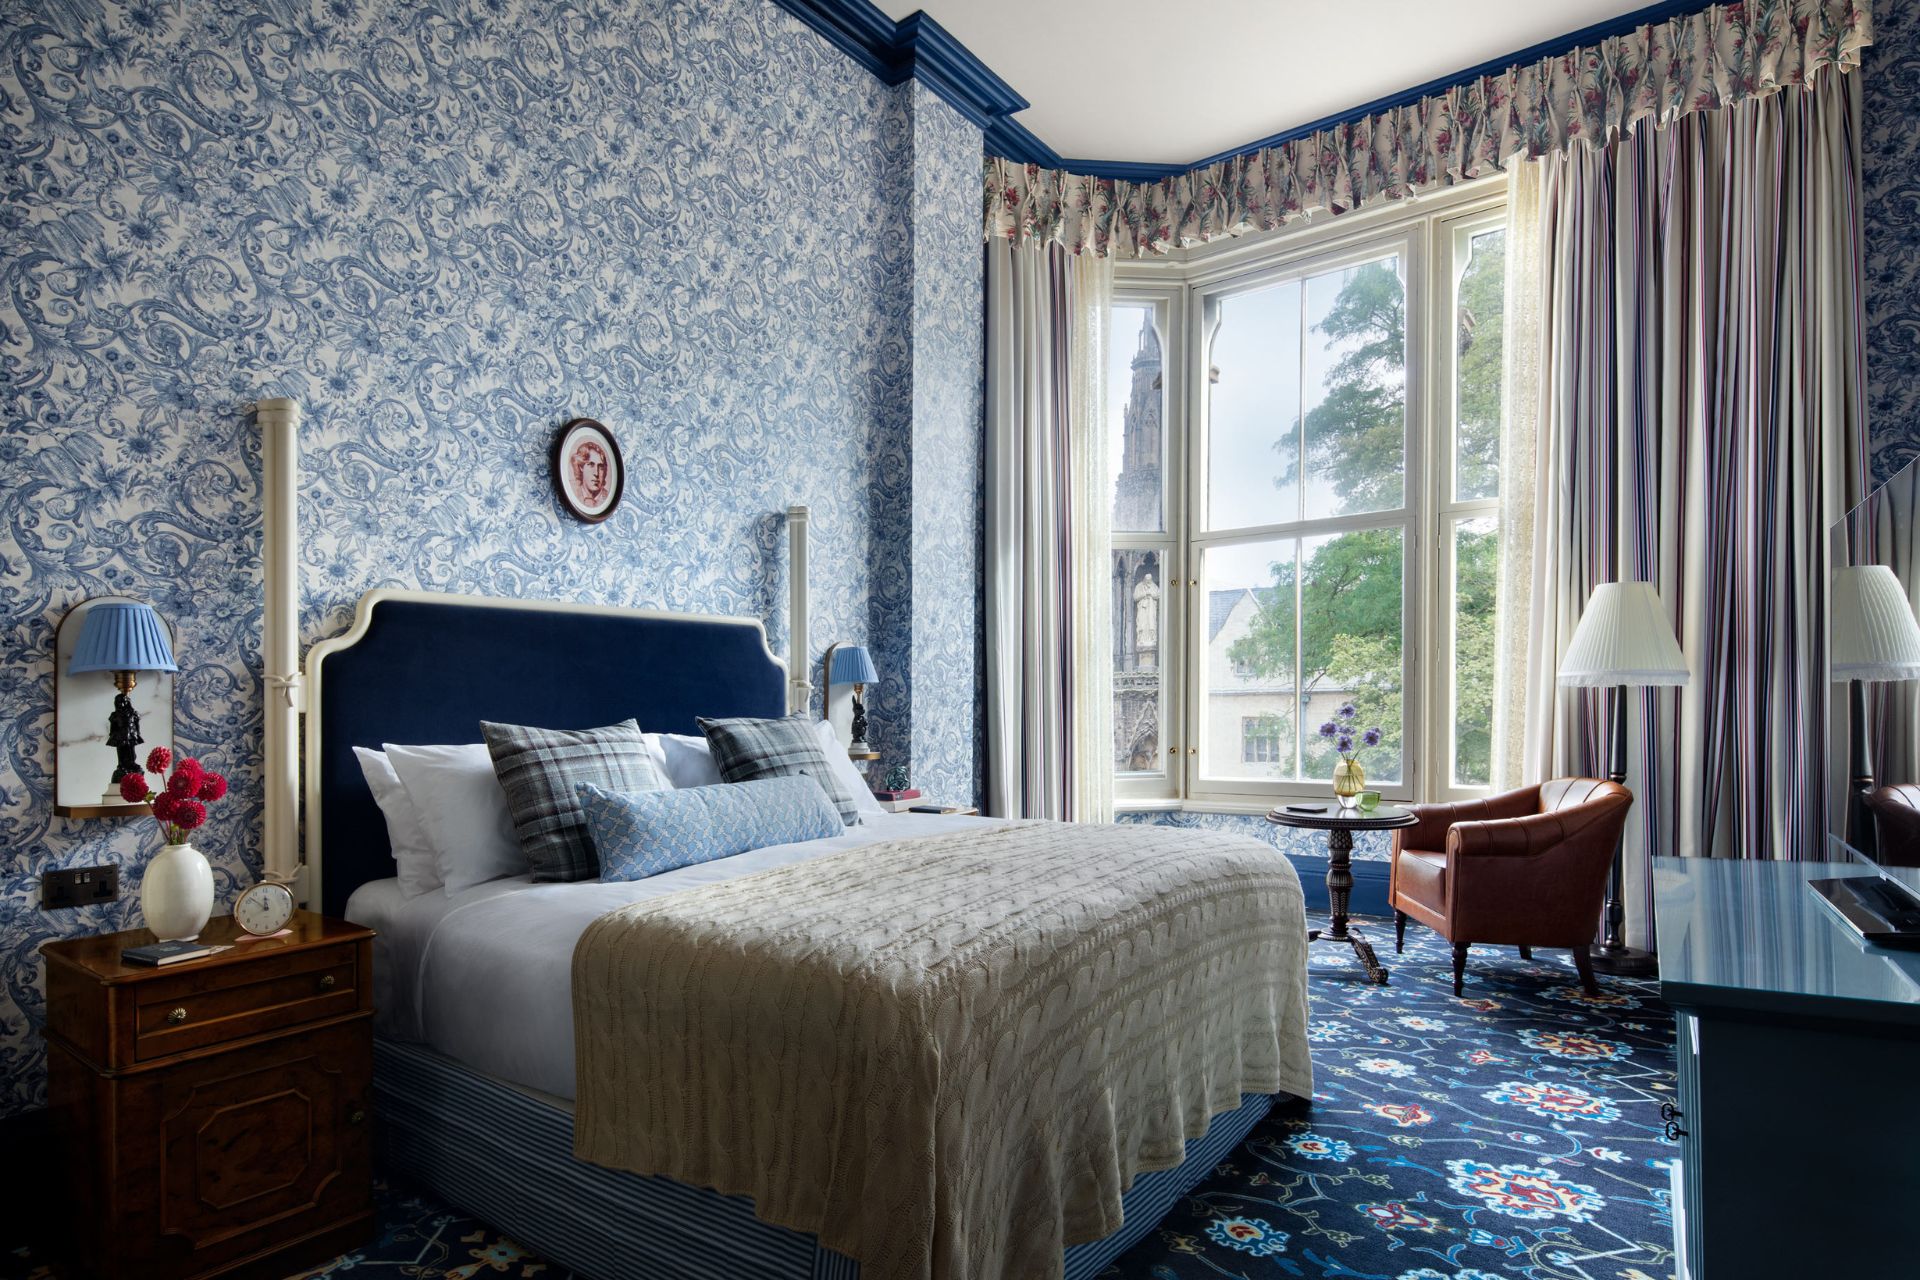 Hotel bedroom with blue floral wallpaper, clashing blue carpets and white bed linen.